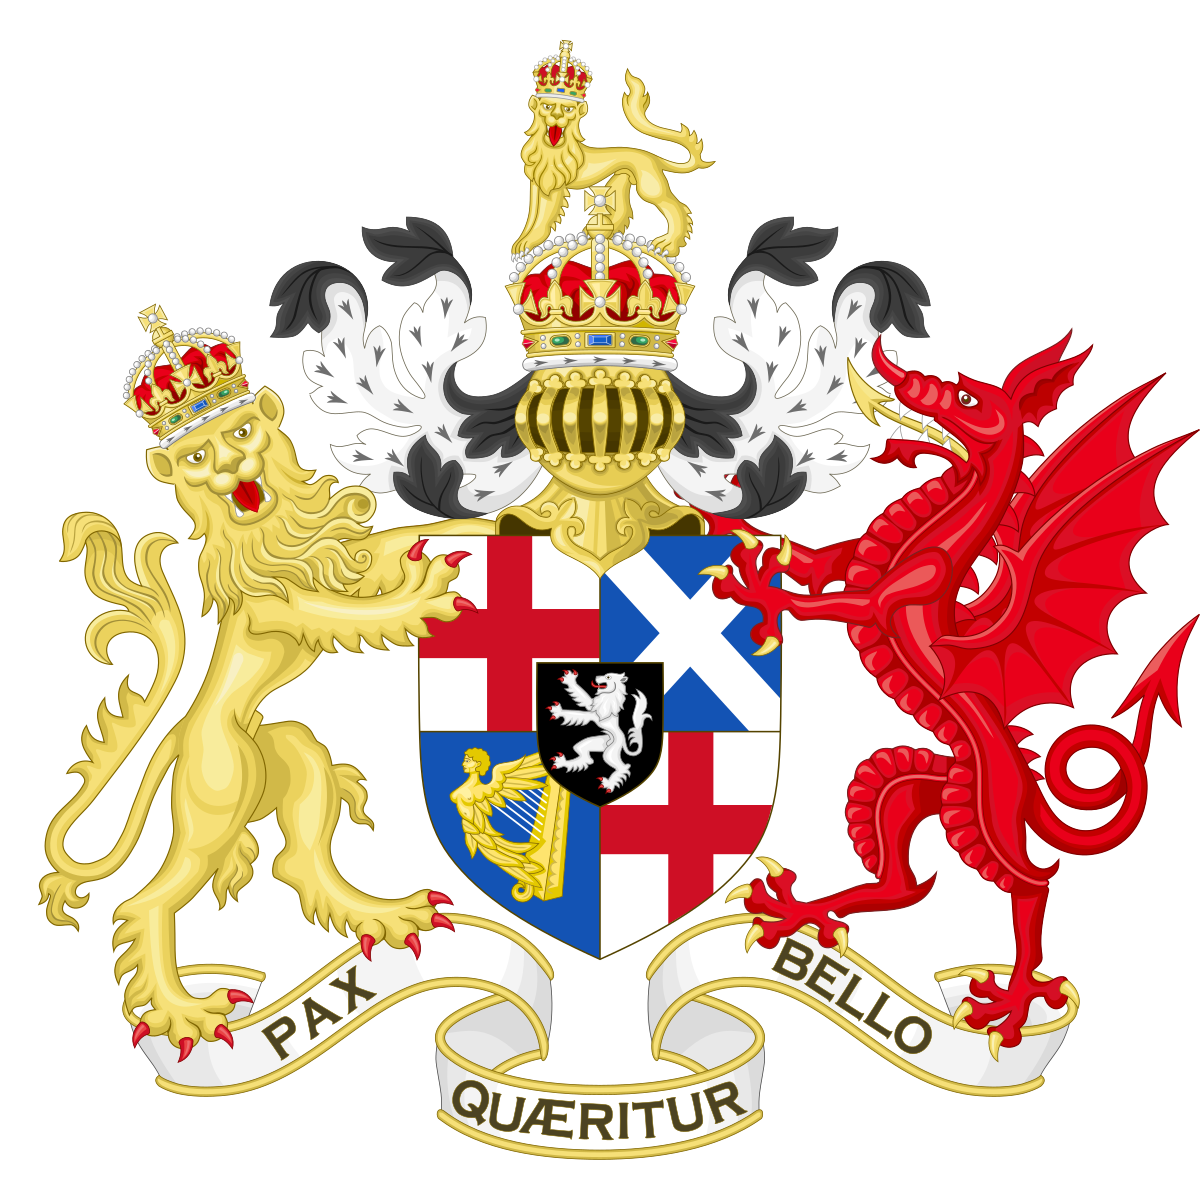 Coat of arms of Great Britain: photo, meaning, description